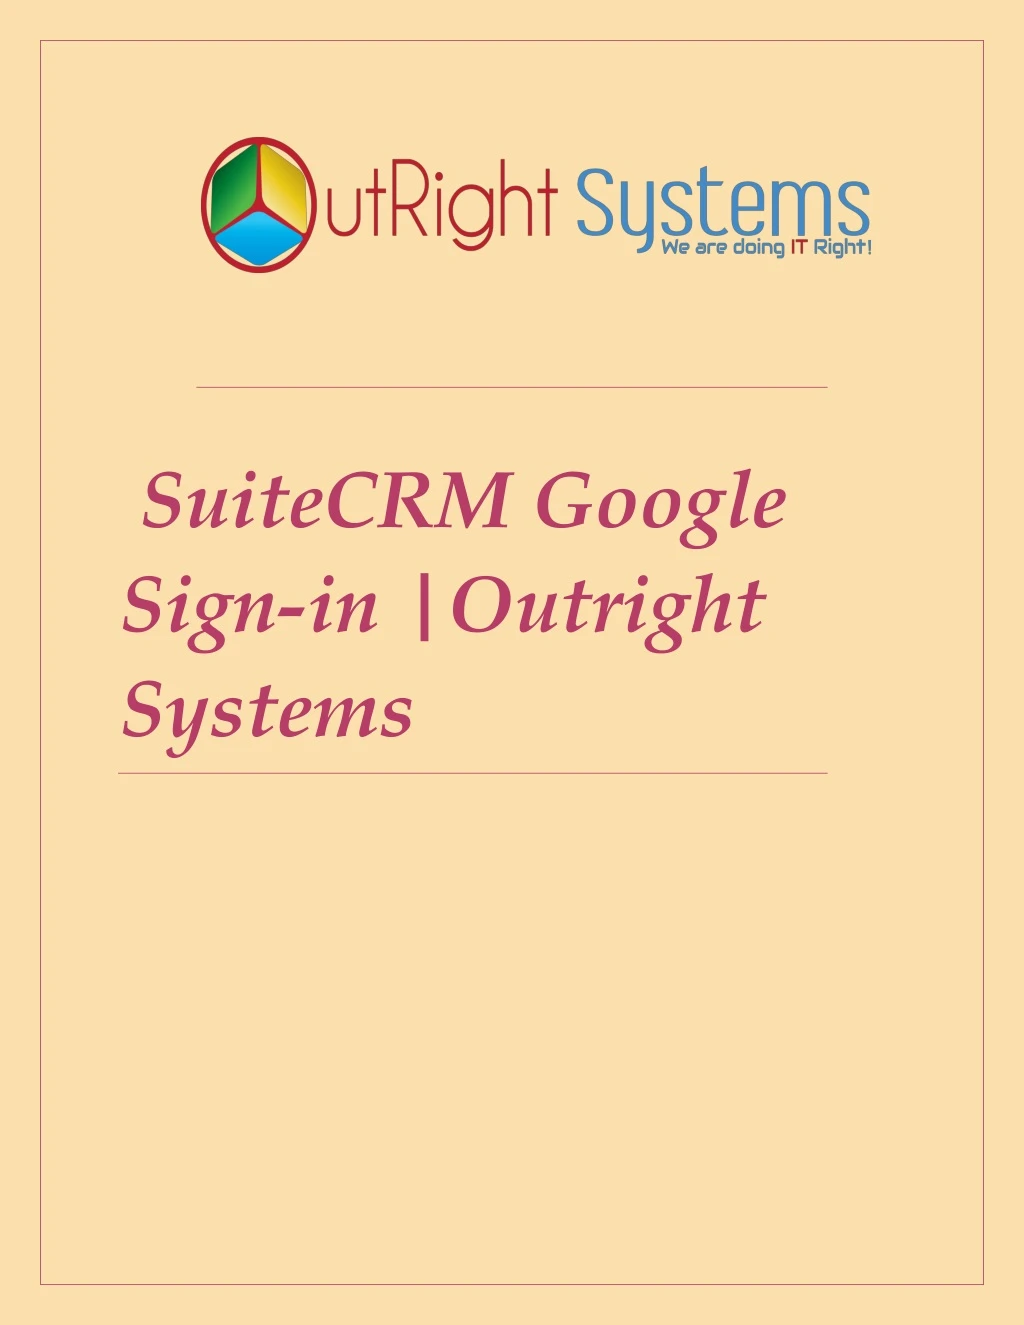 suitecrm google sign in outright systems